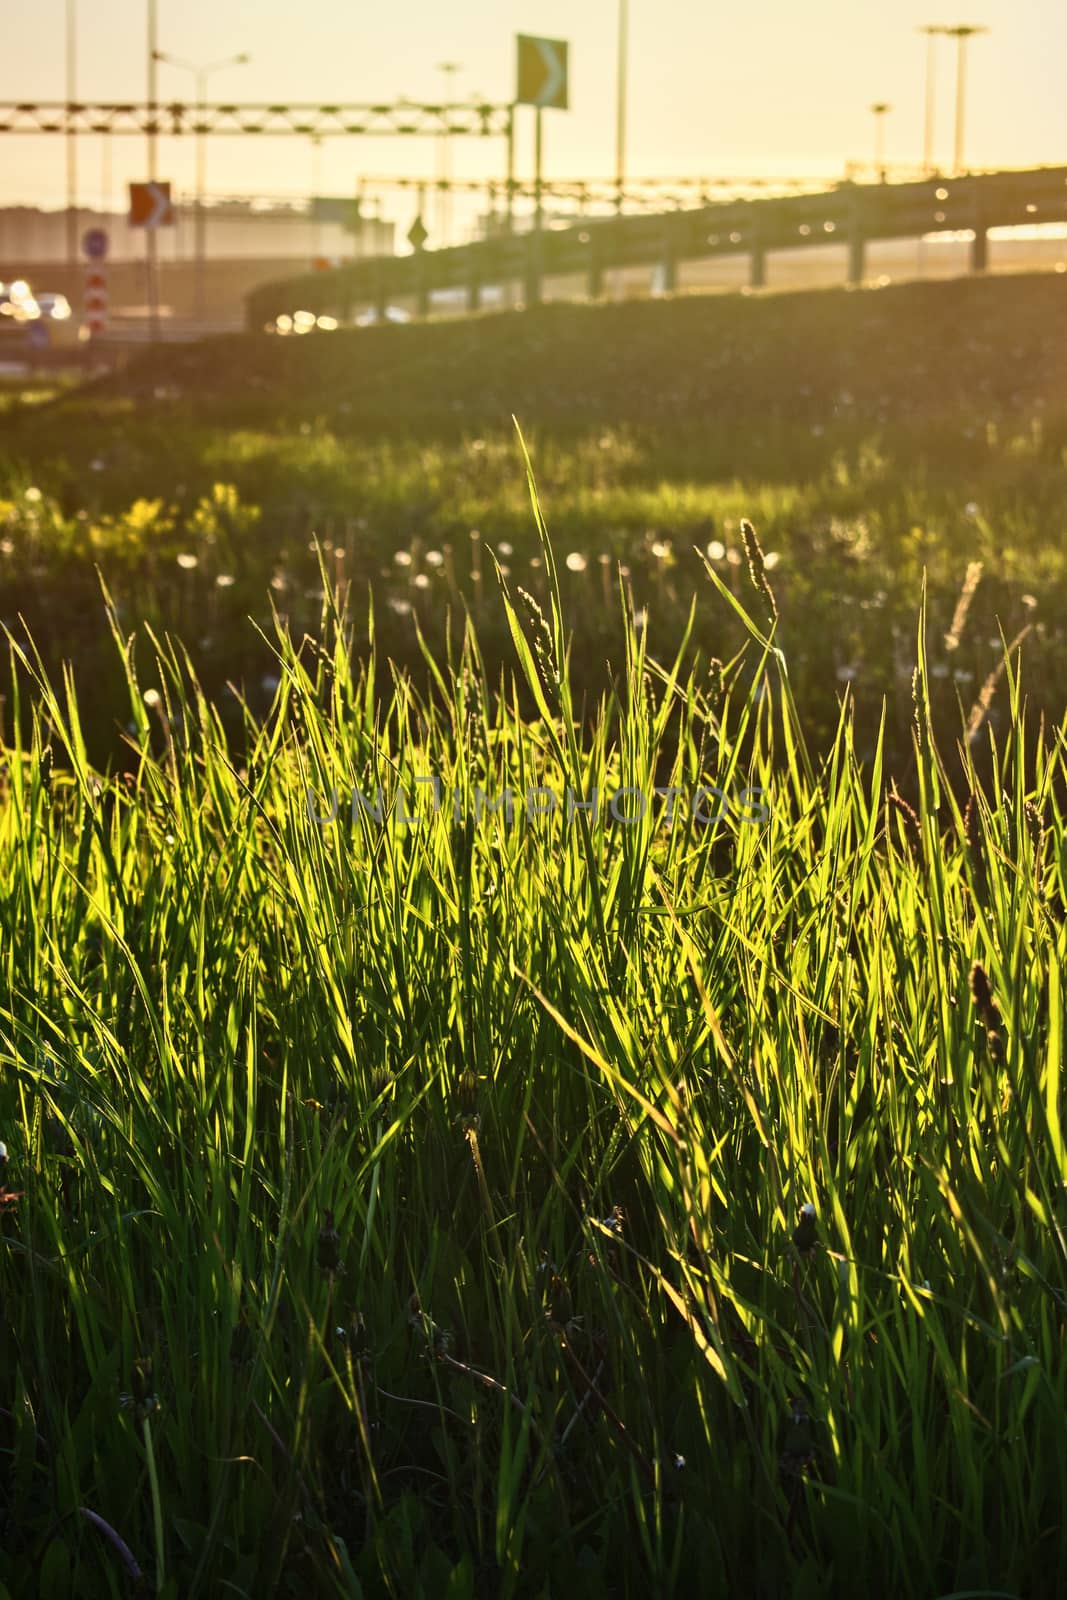 Grass illuminated by the setting sun near the motorway by Elen777